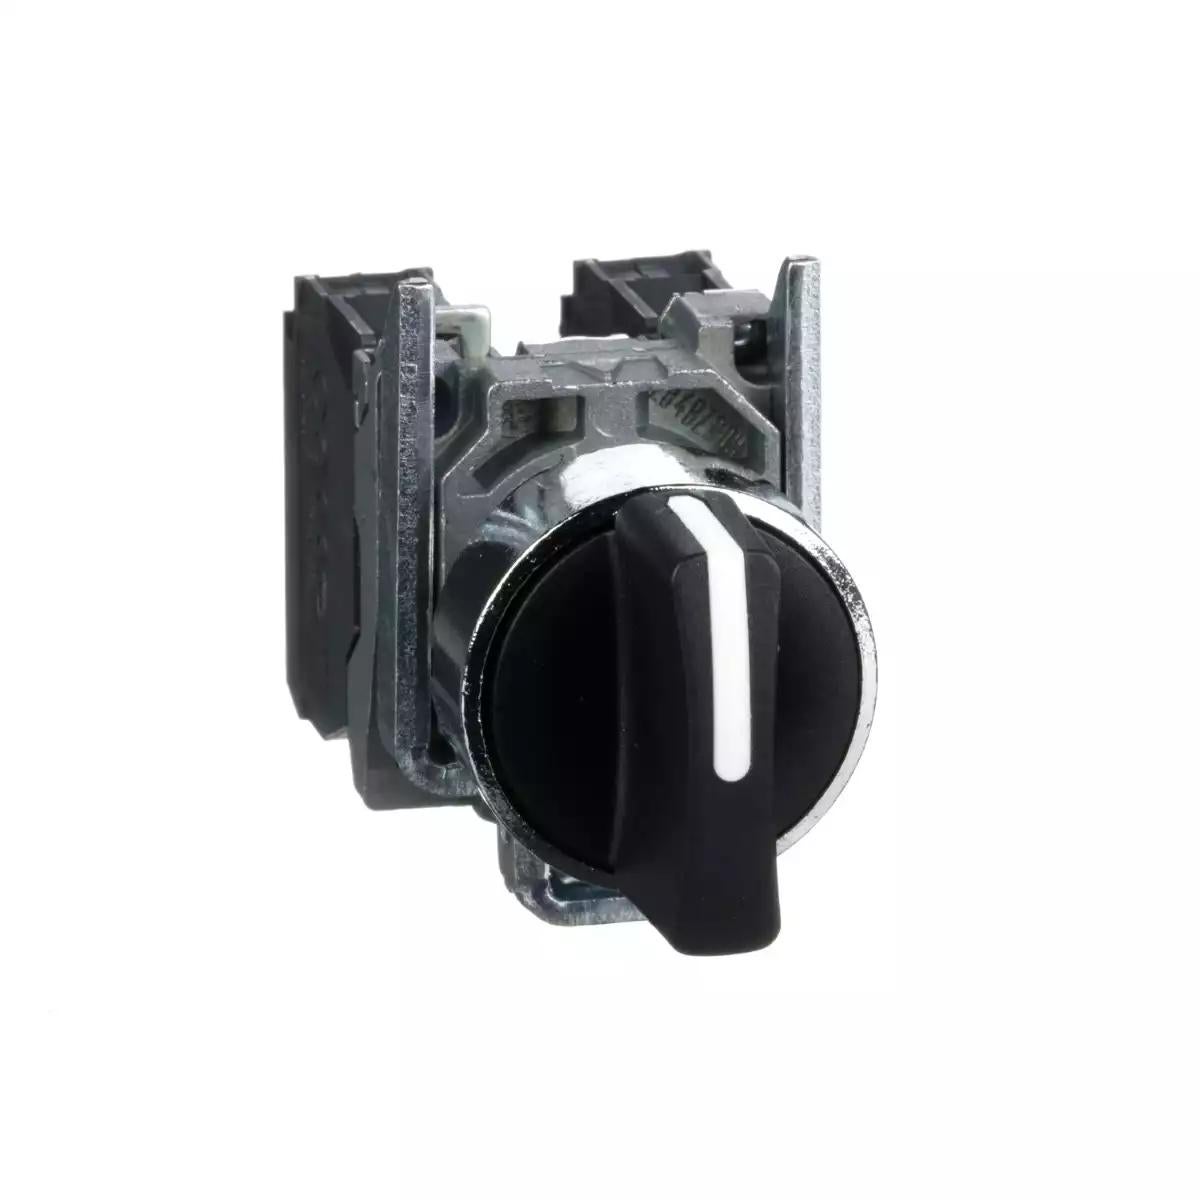 Schneider Electric Selector switch, Harmony XB4, metal, black, 22mm, 3 positions, stay put, 2NO